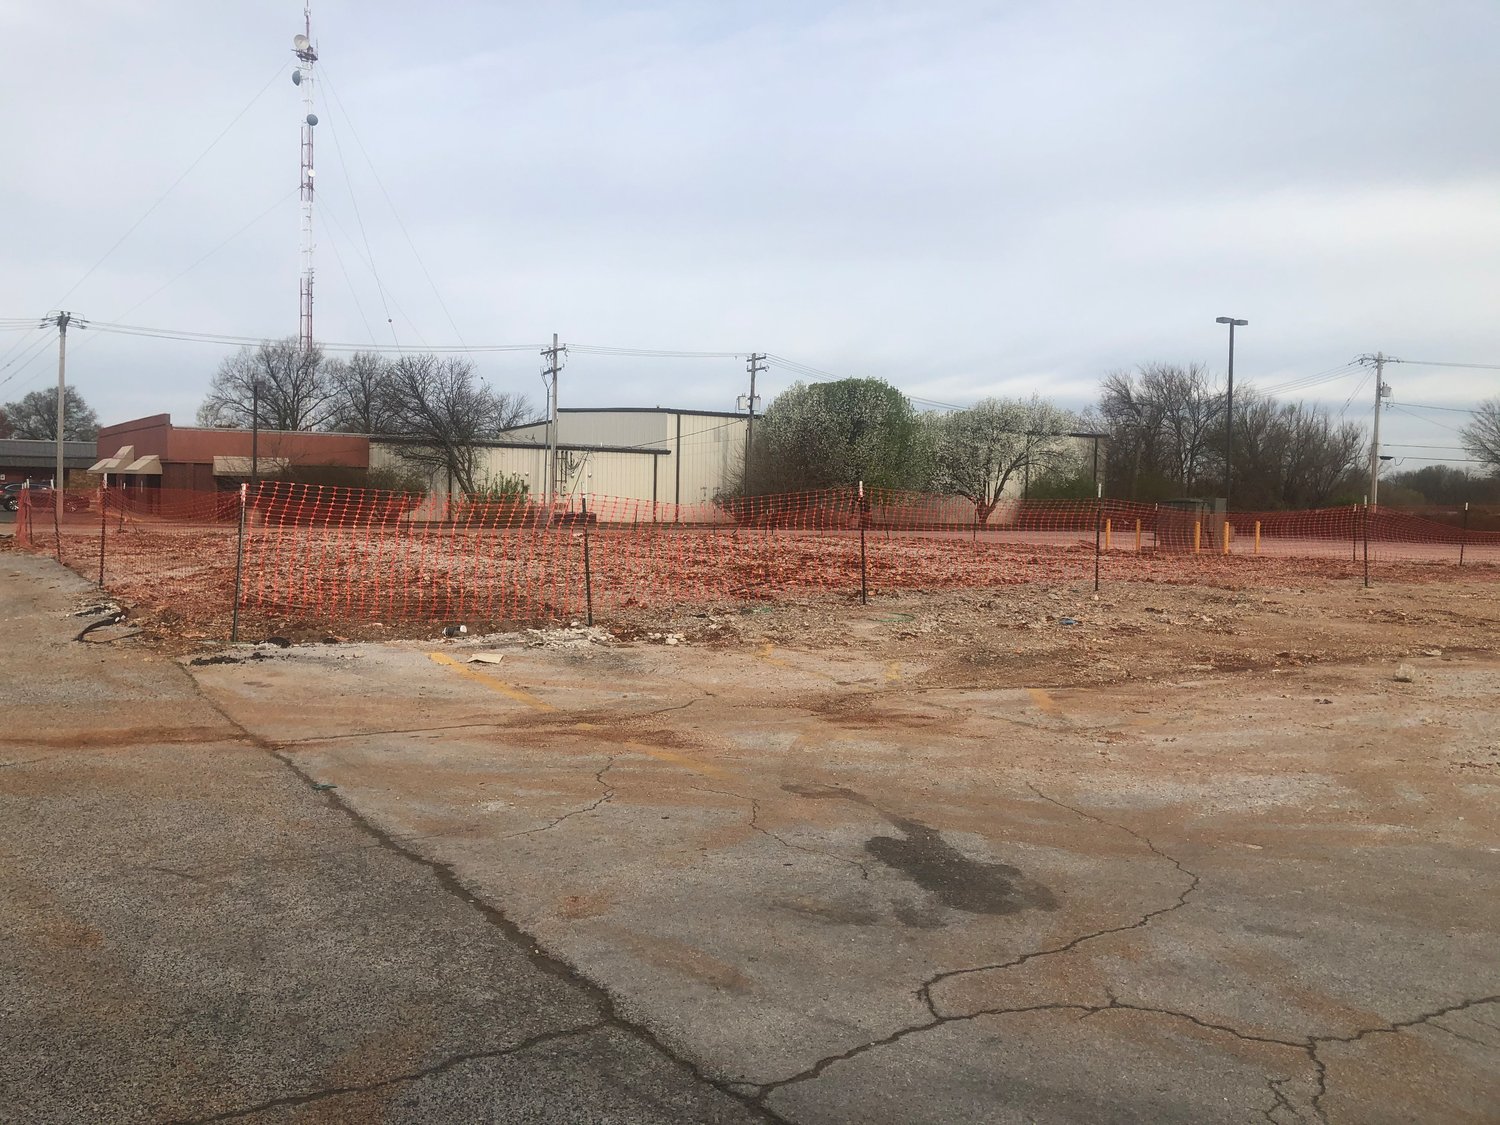 A Sonic restaurant is slated to be built where a Perkins restaurant was recently razed.